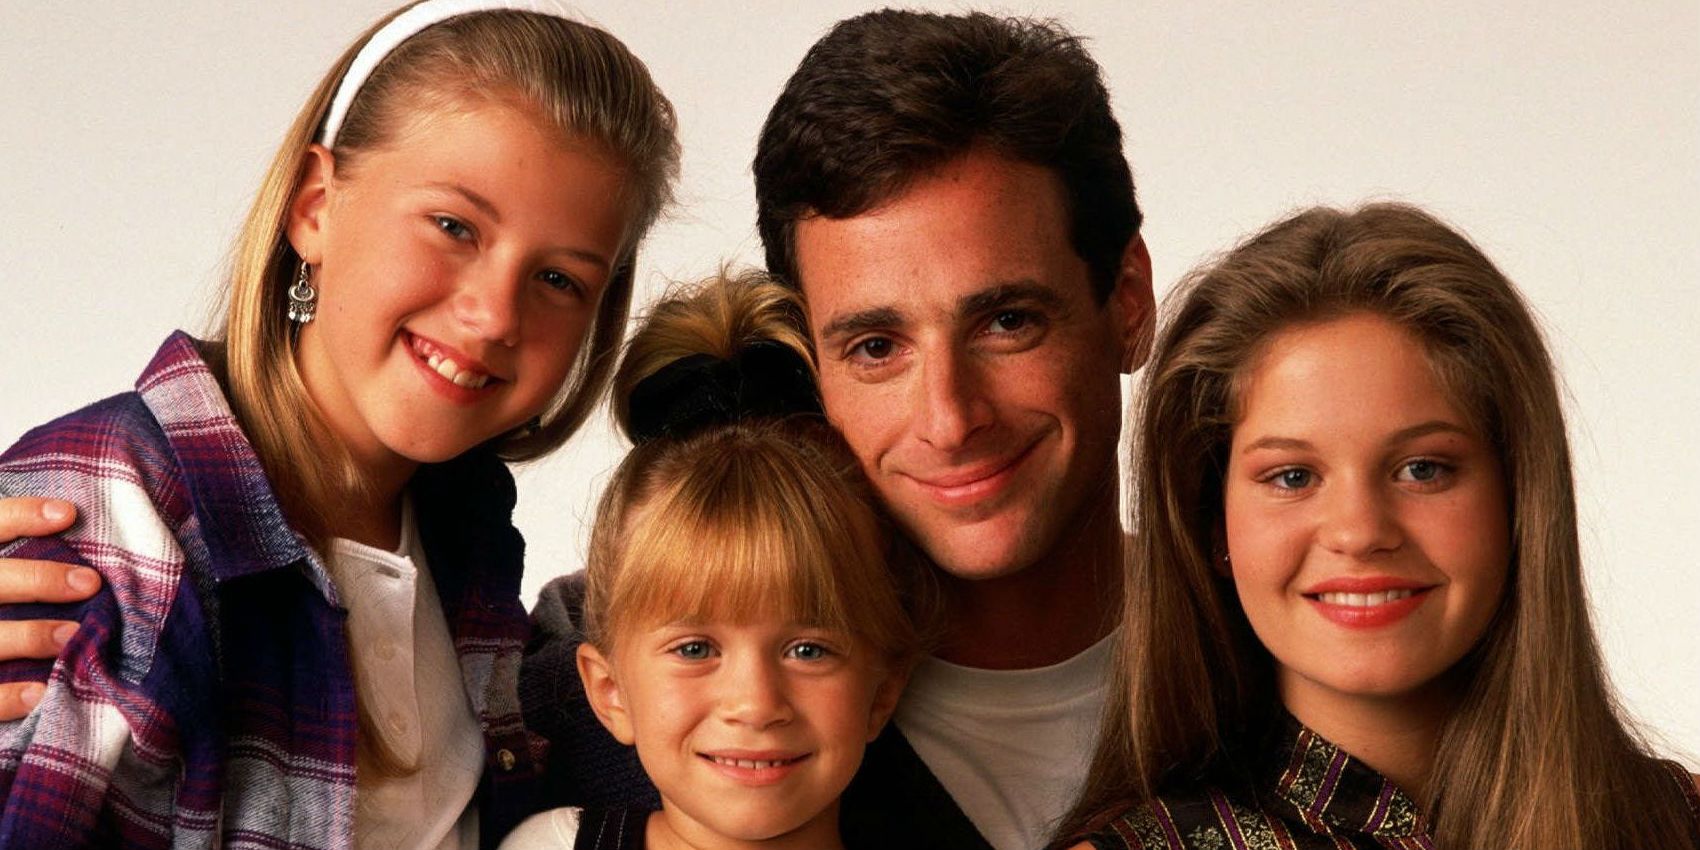 Danny, DJ, Stephanie, and Michelle in Full House